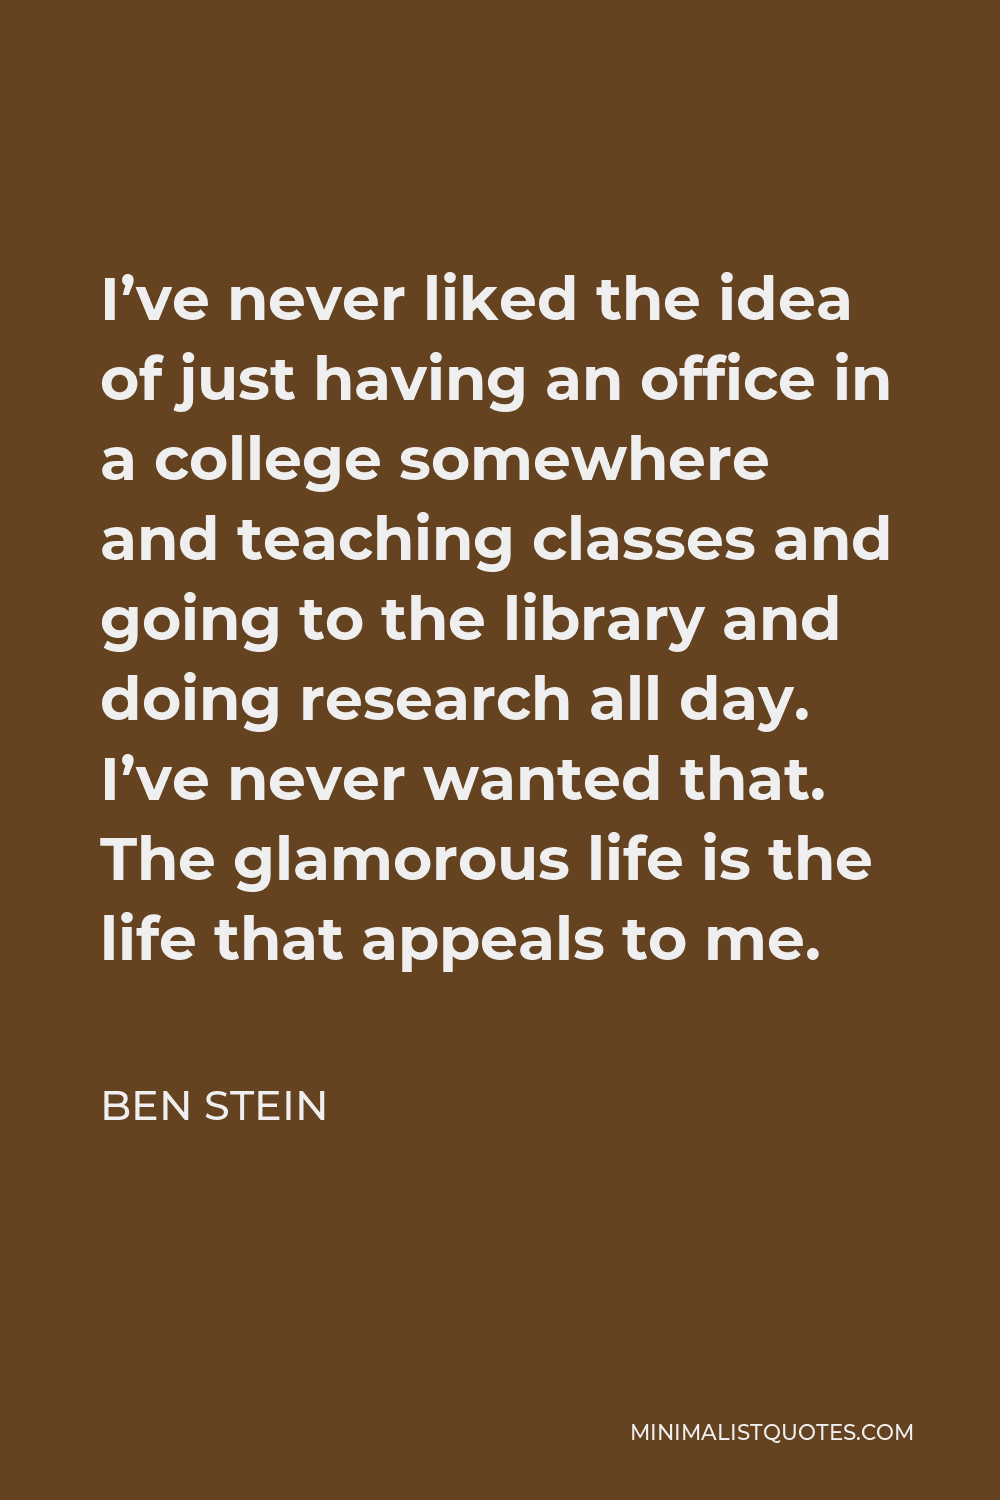 Ben Stein Quote - I’ve never liked the idea of just having an office in a college somewhere and teaching classes and going to the library and doing research all day. I’ve never wanted that. The glamorous life is the life that appeals to me.